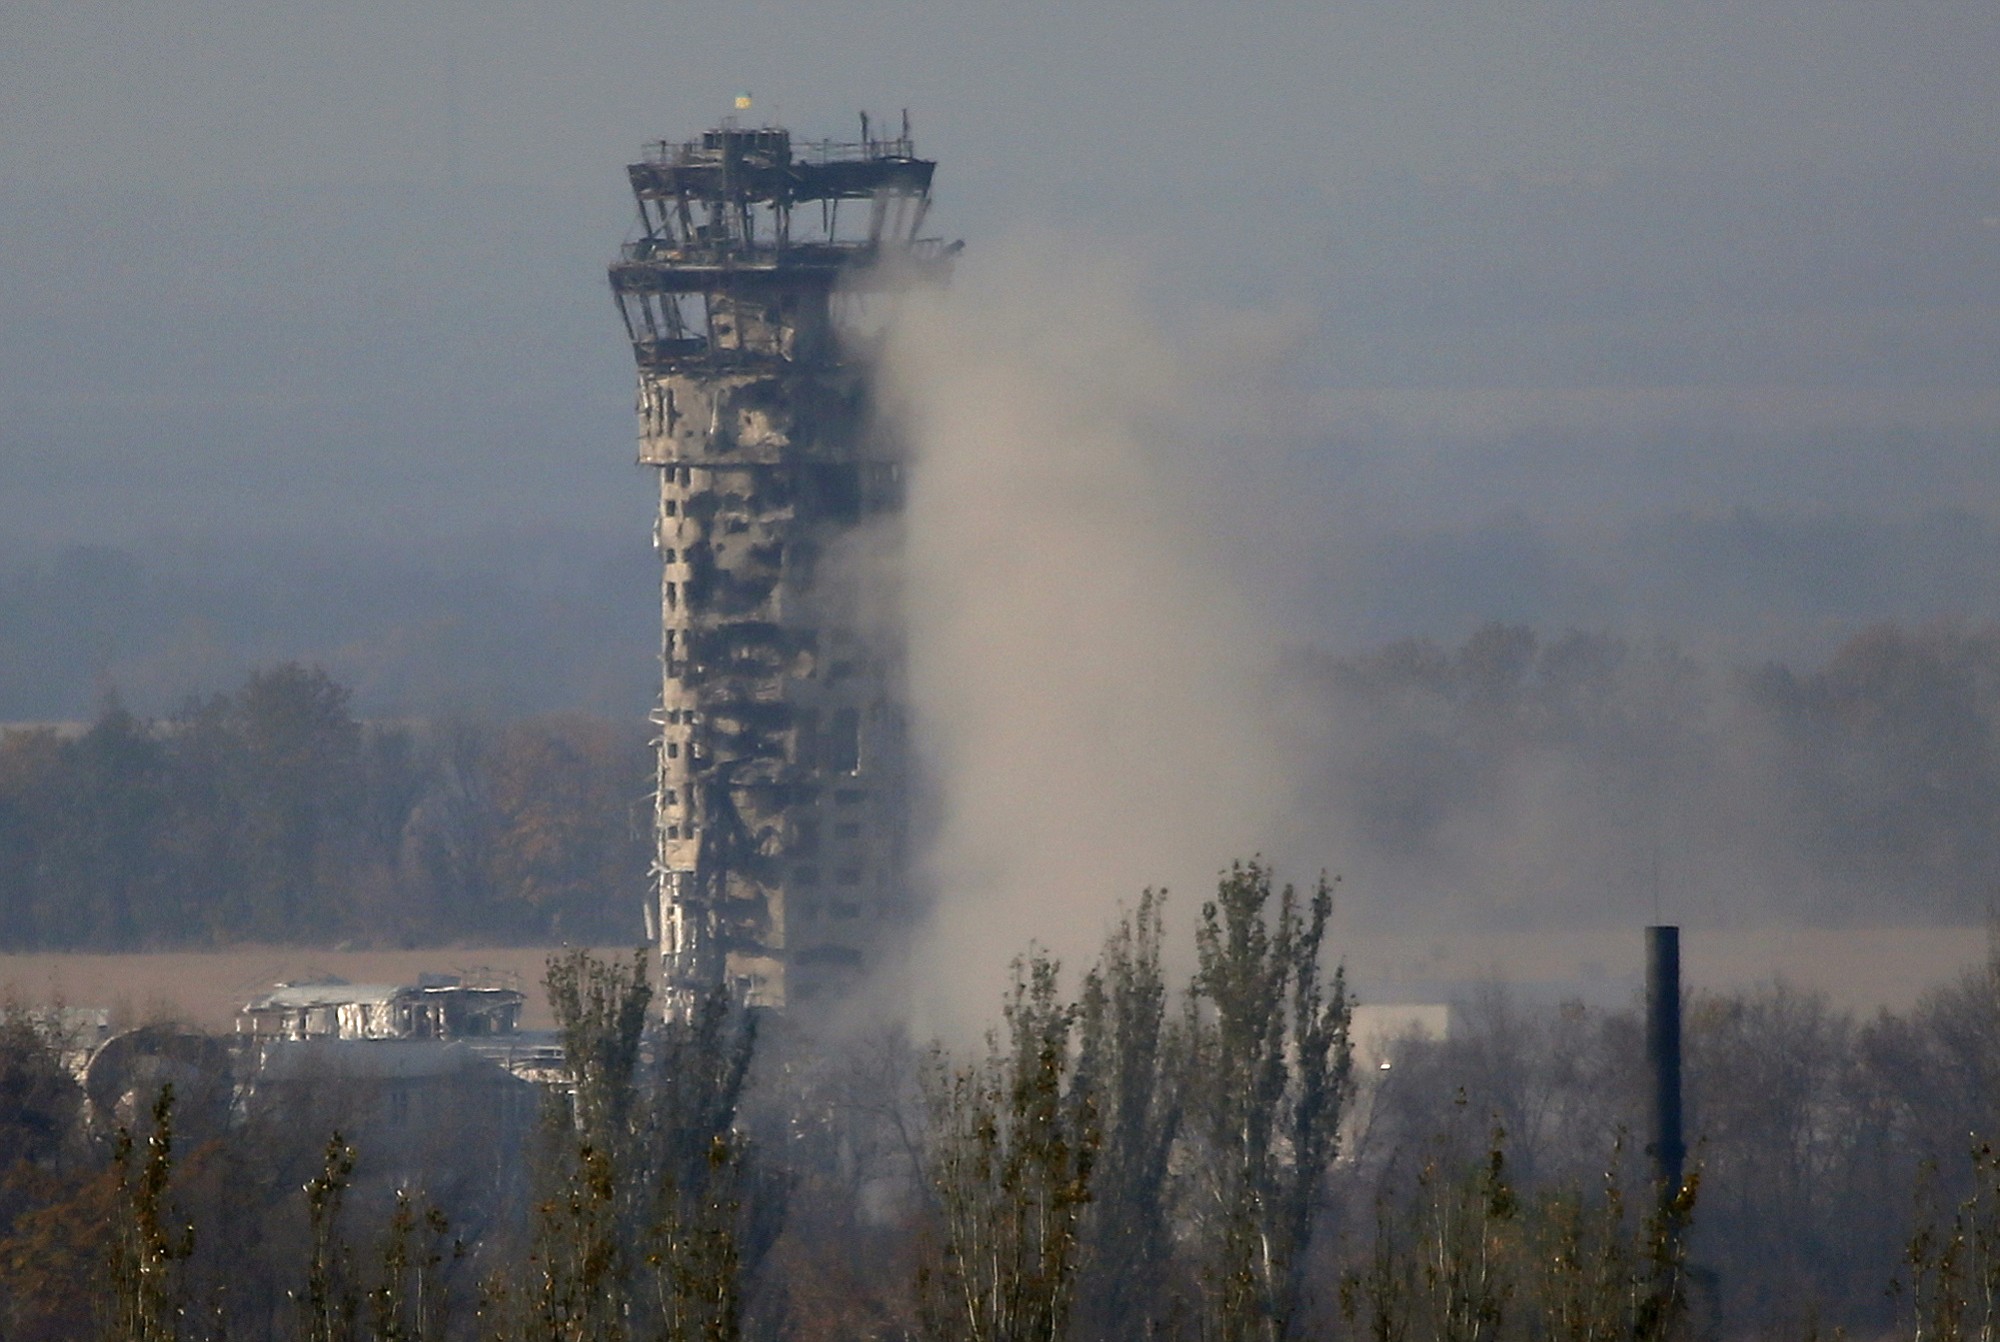 A Ukrainian flag flies atop the traffic control tower of the Donetsk airport during an artillery battle between pro-Russian rebels and Ukrainian government forces Friday in Donetsk, Ukraine.